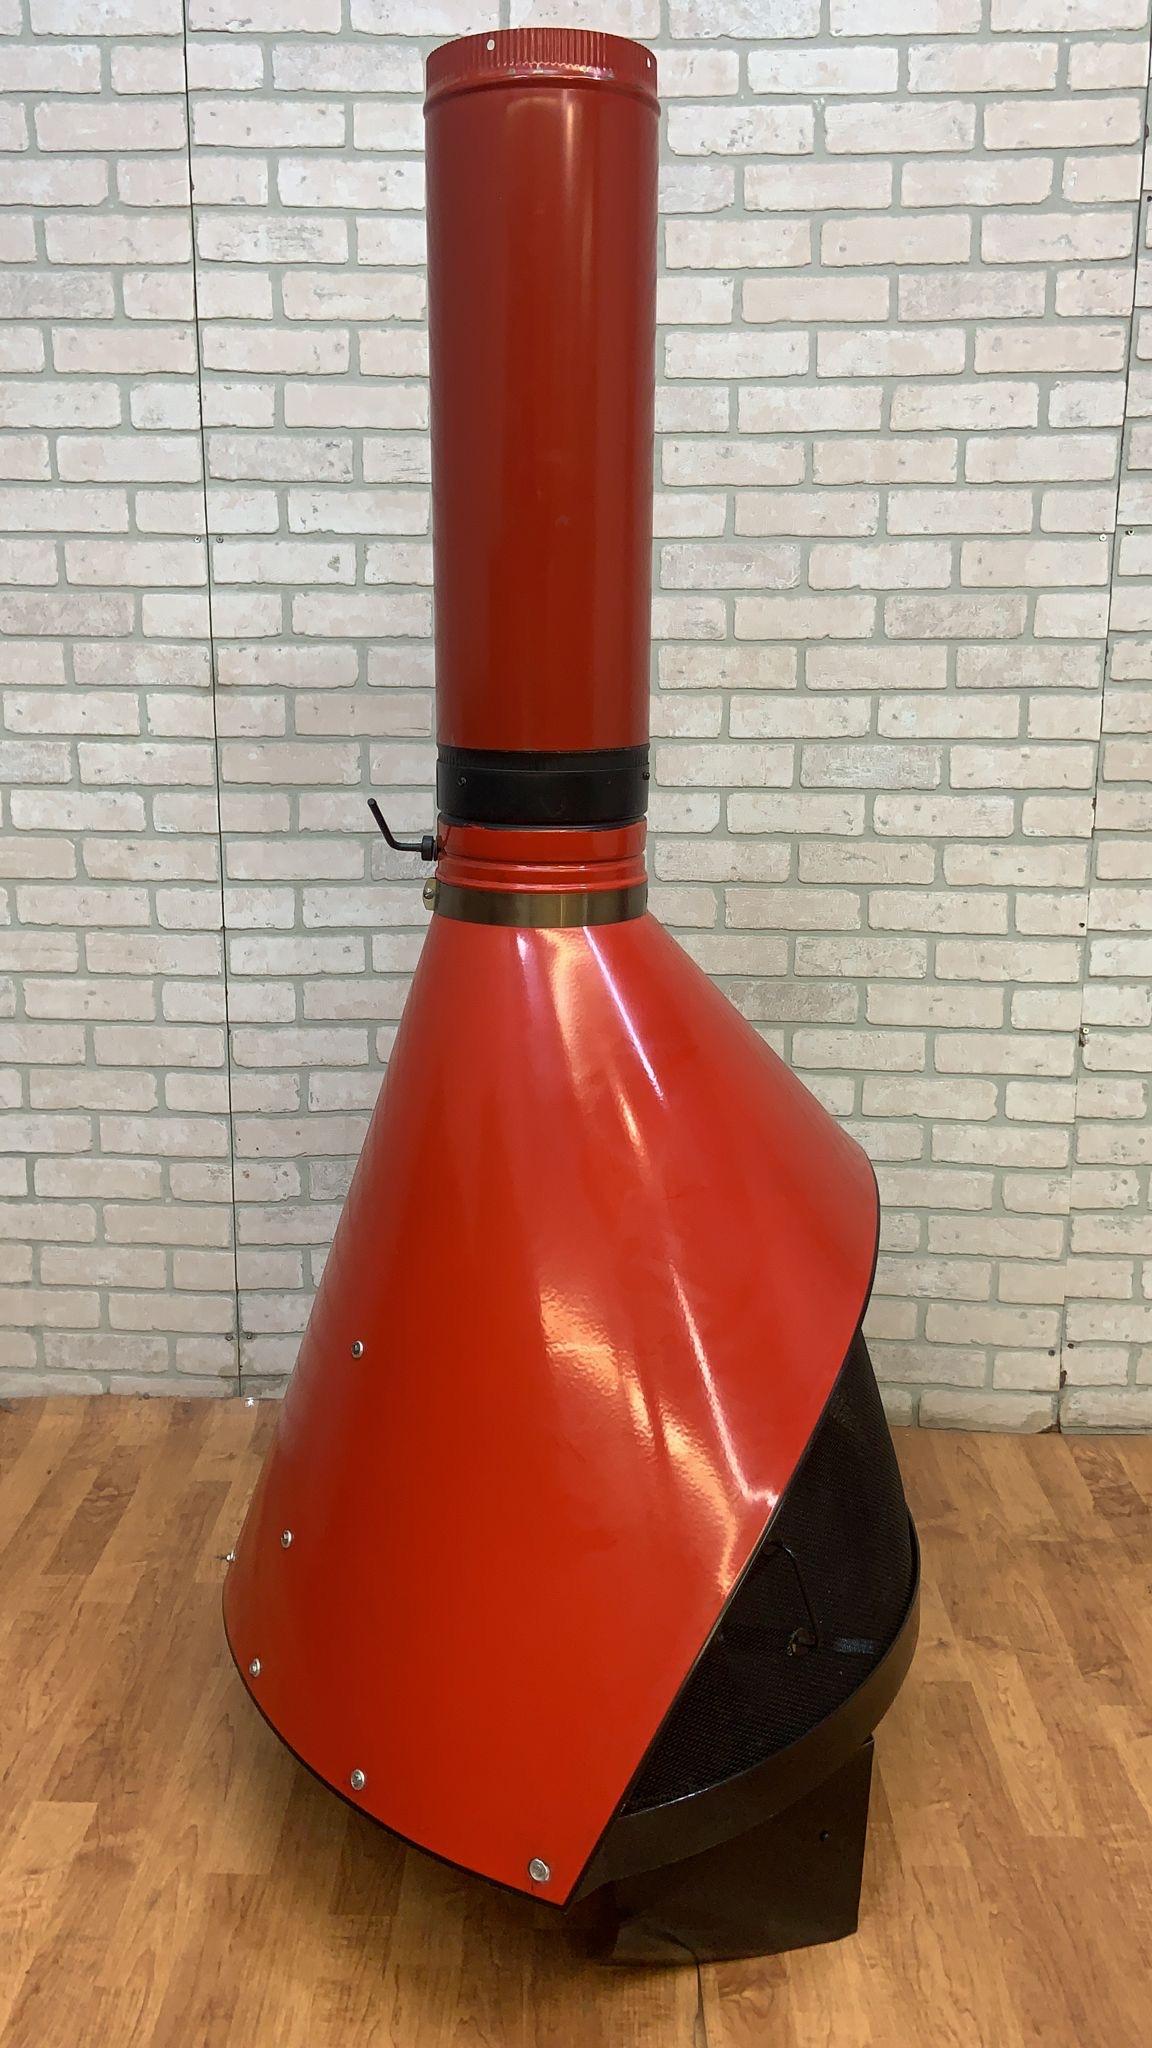 Vintage Mid Century Modern Preway Freestanding Cone Fireplace in Red  - Indoor/Outdoor - Gas/Wood Burning Enamel Stove 

Original vintage mid century modern Preway gas/wood burning fireplace
in red enamel finish.

Circa 1960

Dimensions:
H: 66”
W: